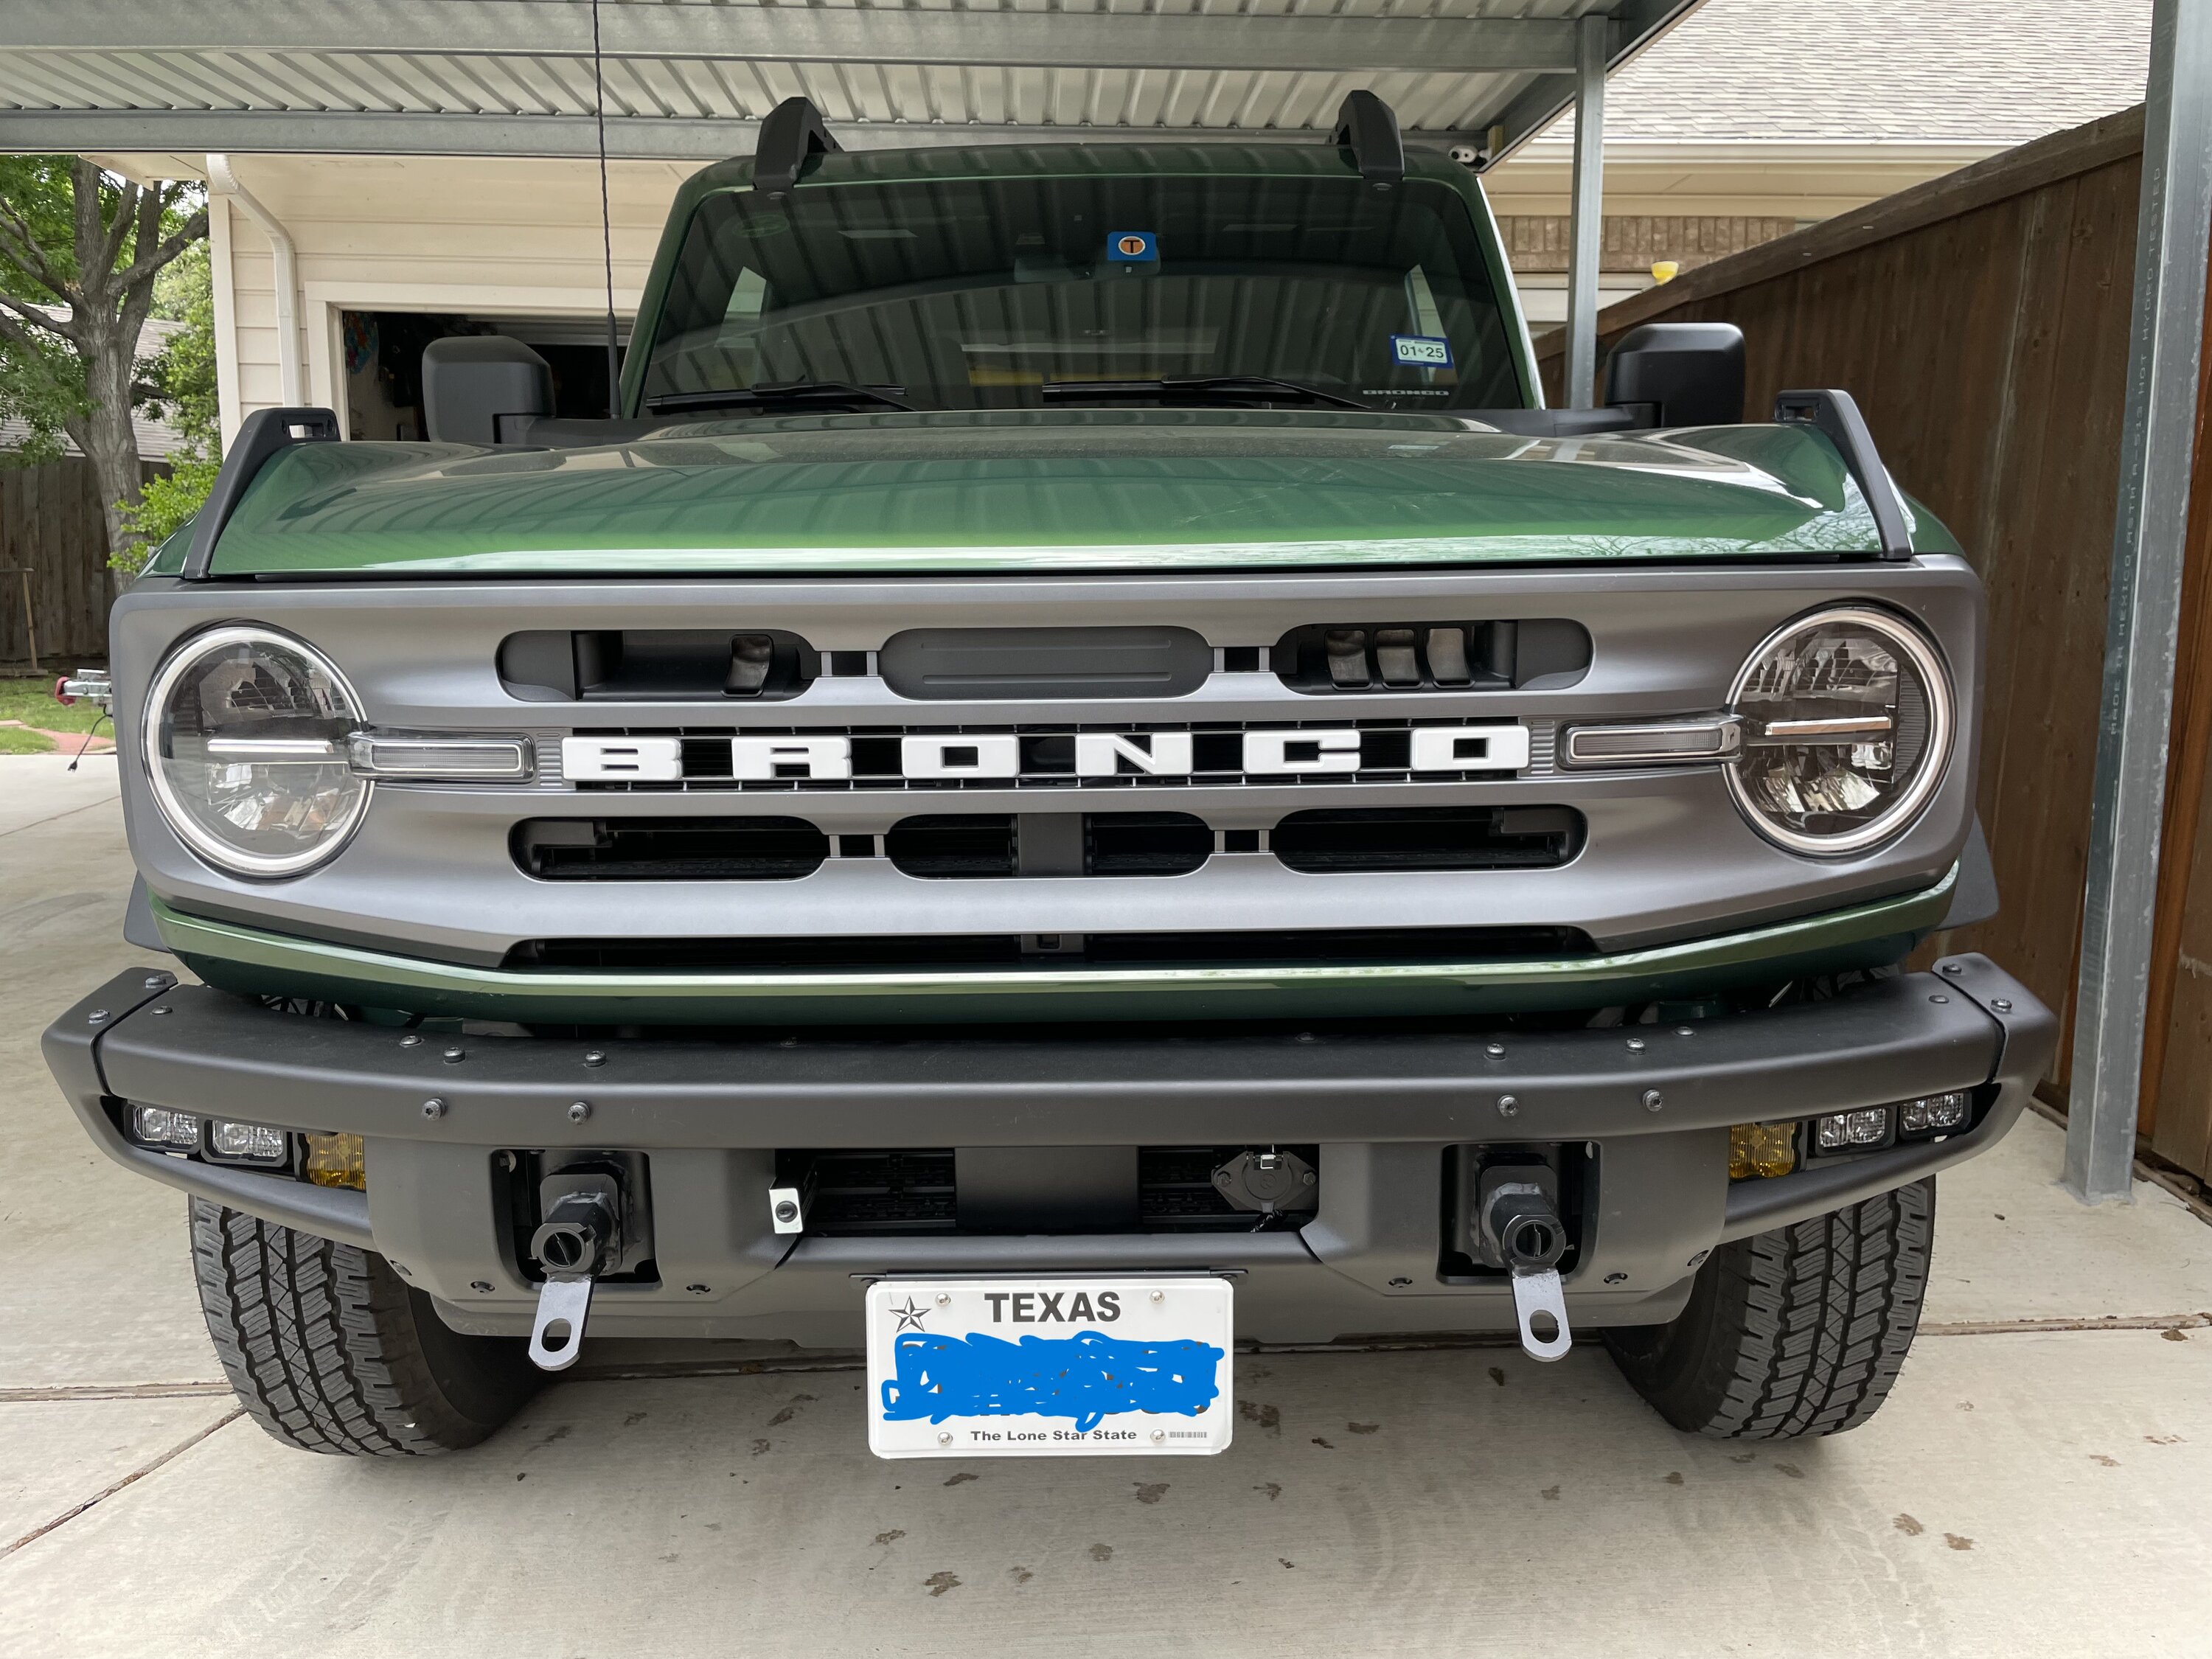 Ford Bronco Flat Towing W/ Capable Bumper Bill Flat Tow Front Picture.JPG